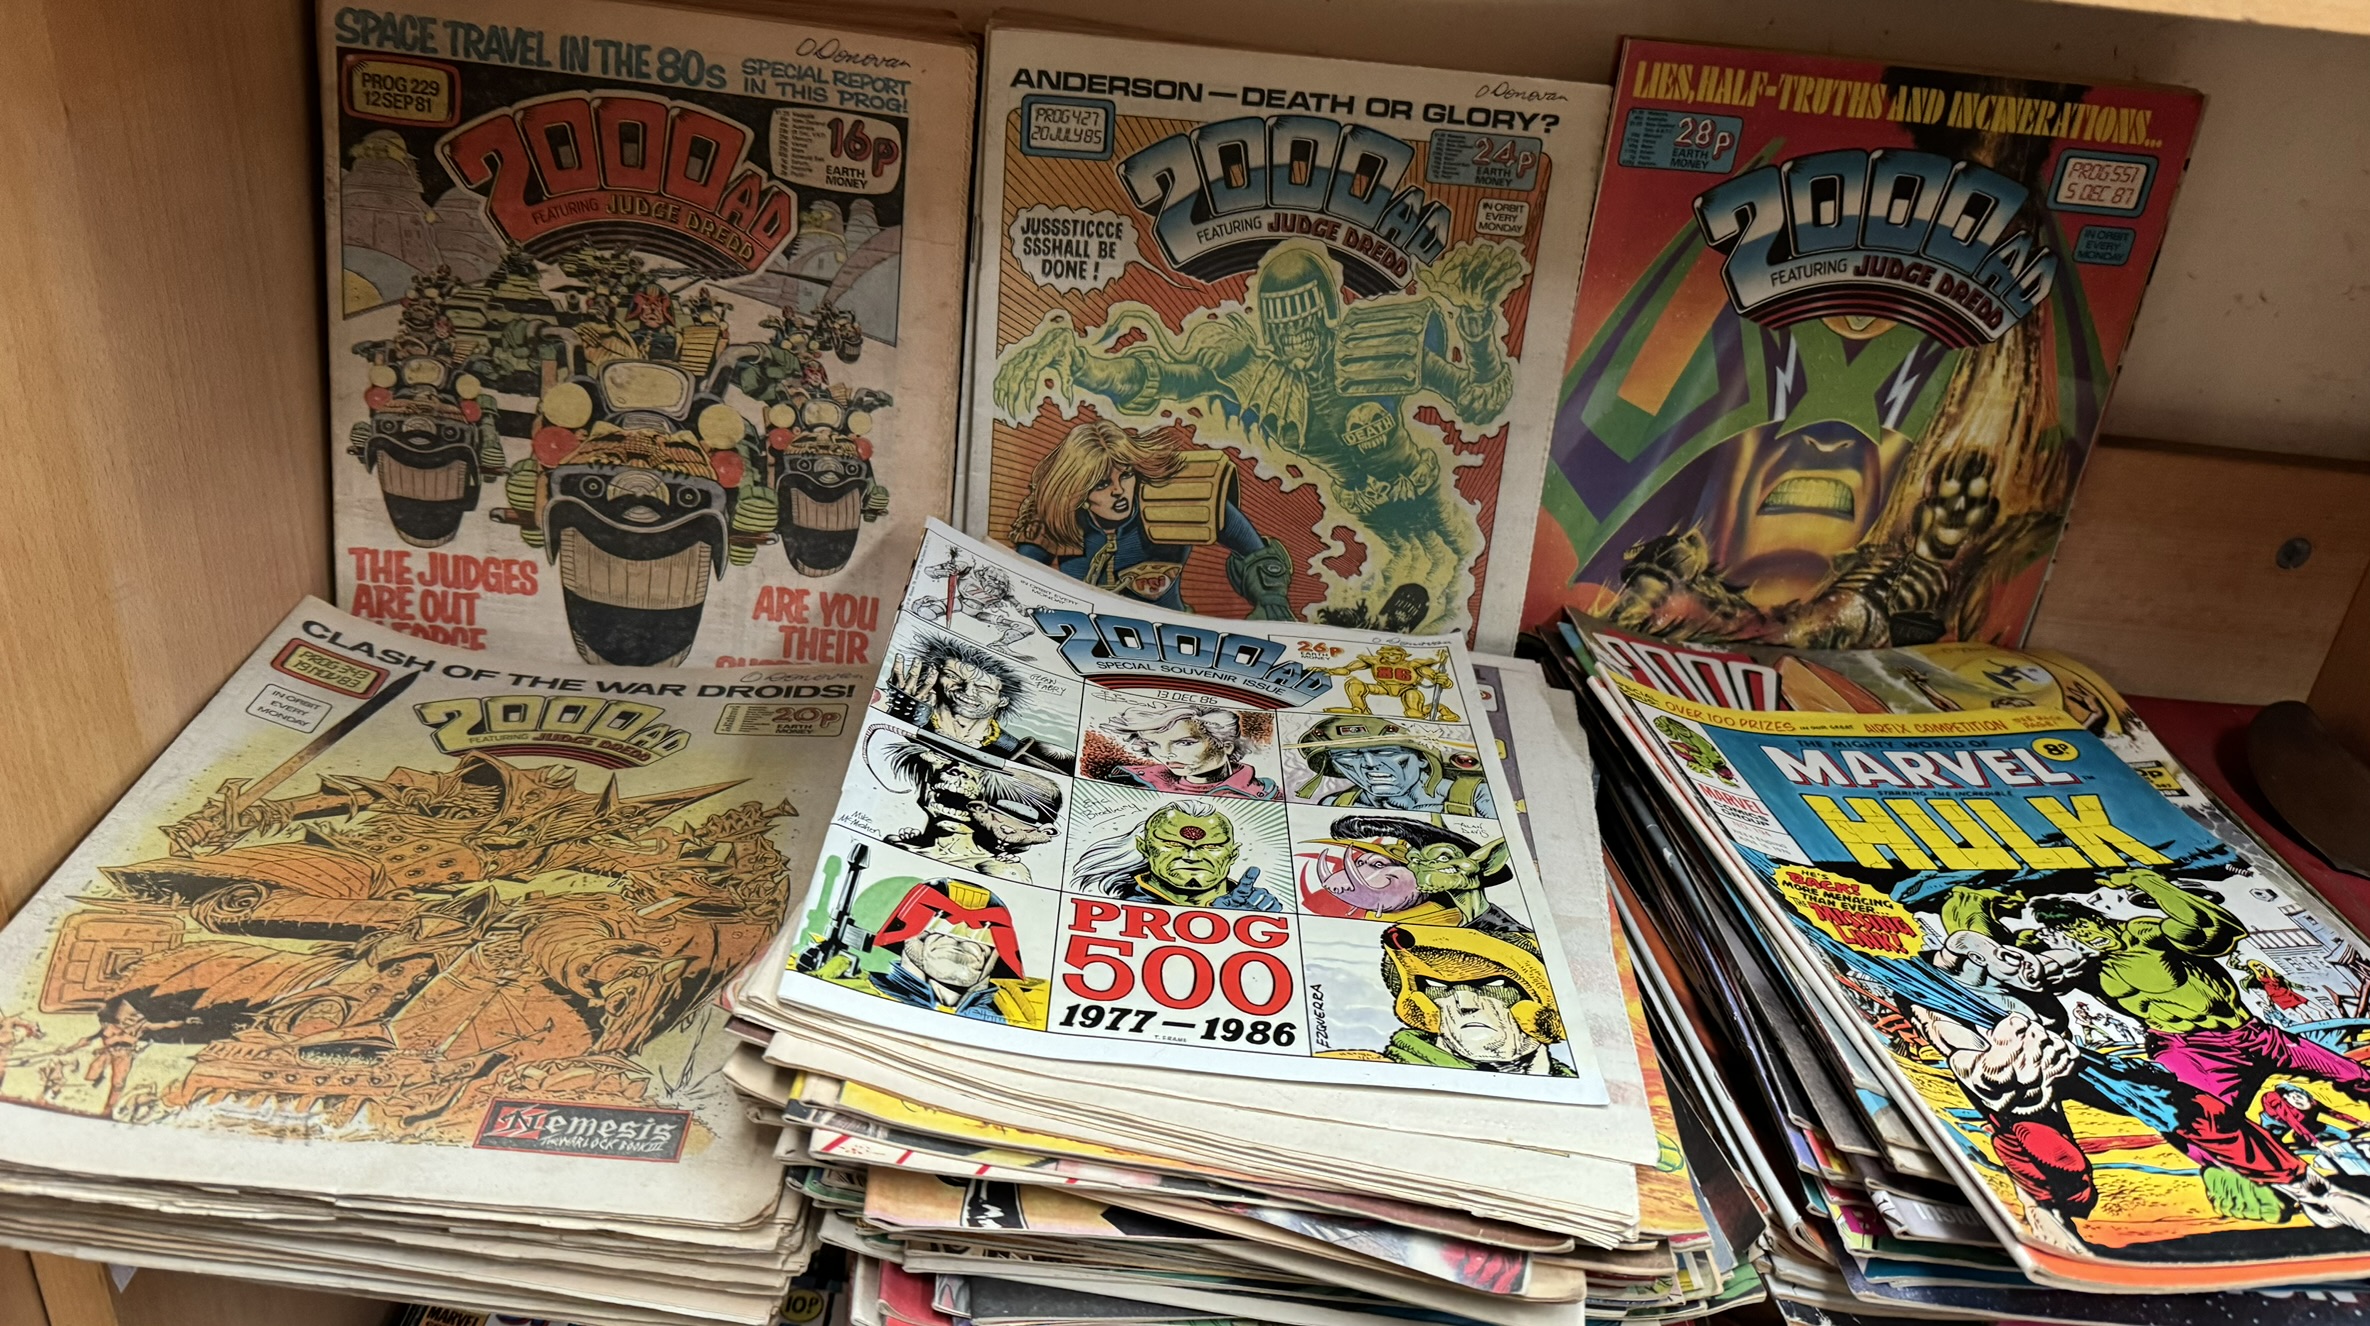 A large collection of comics including 2000AD featuring Judge Dredd, numbers 229-242, 331-335, - Image 3 of 4